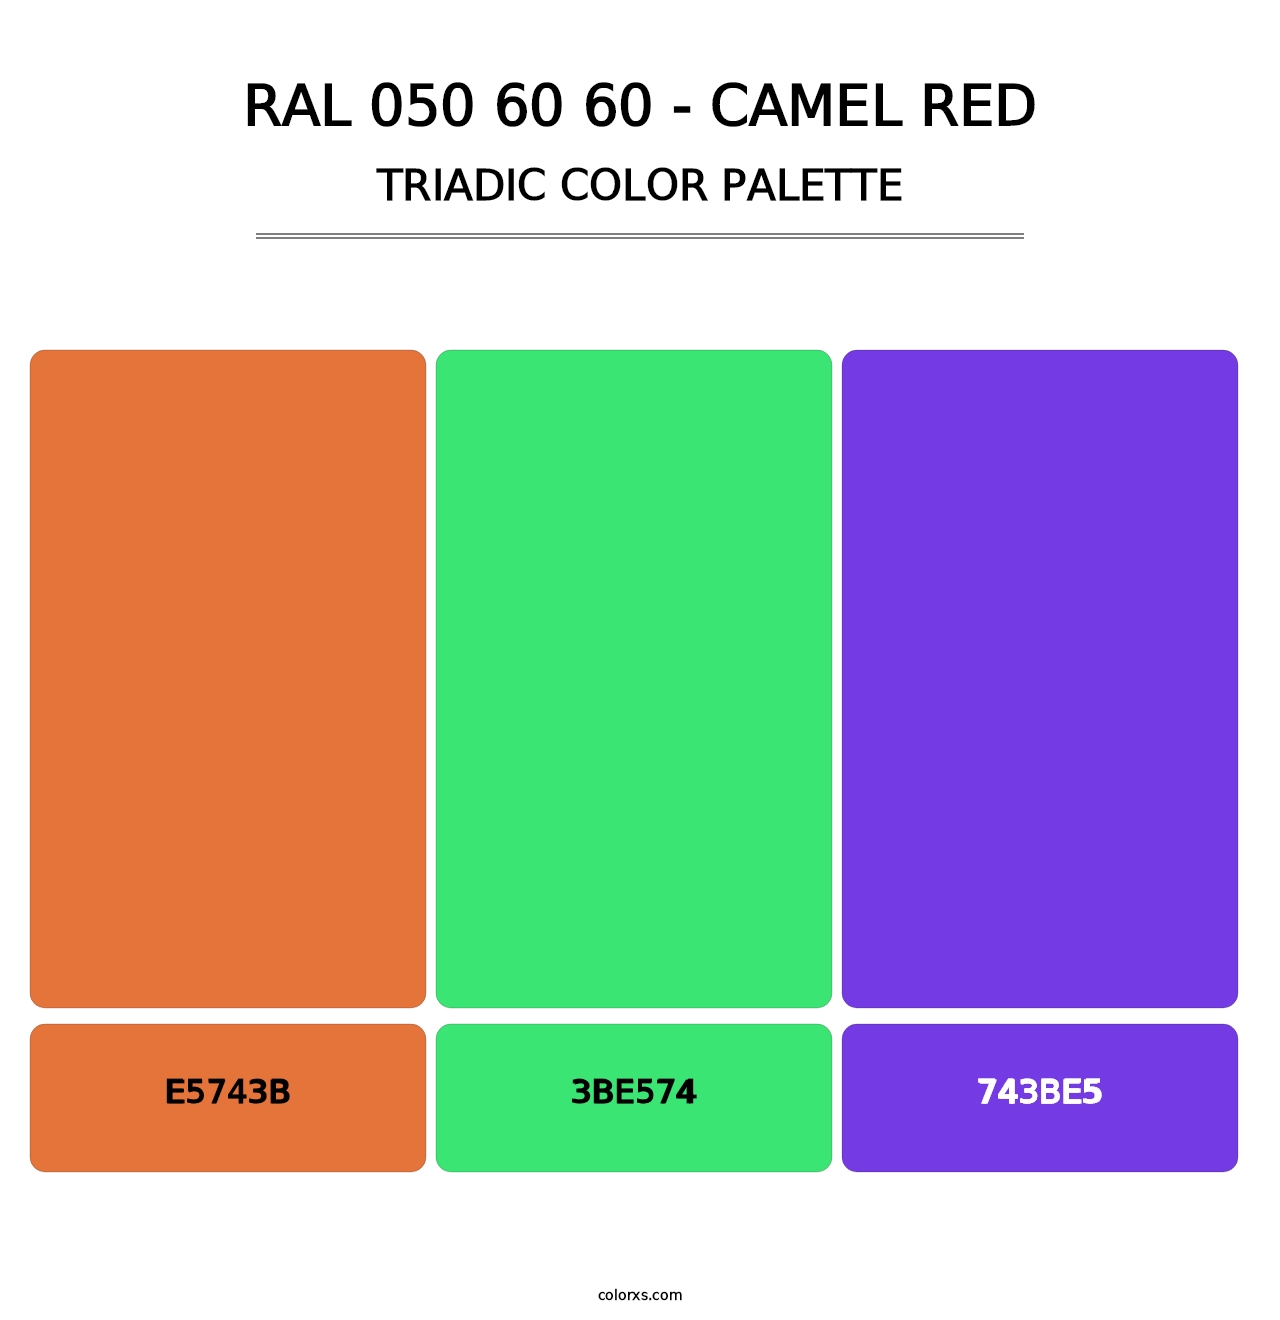 RAL 050 60 60 - Camel Red - Triadic Color Palette